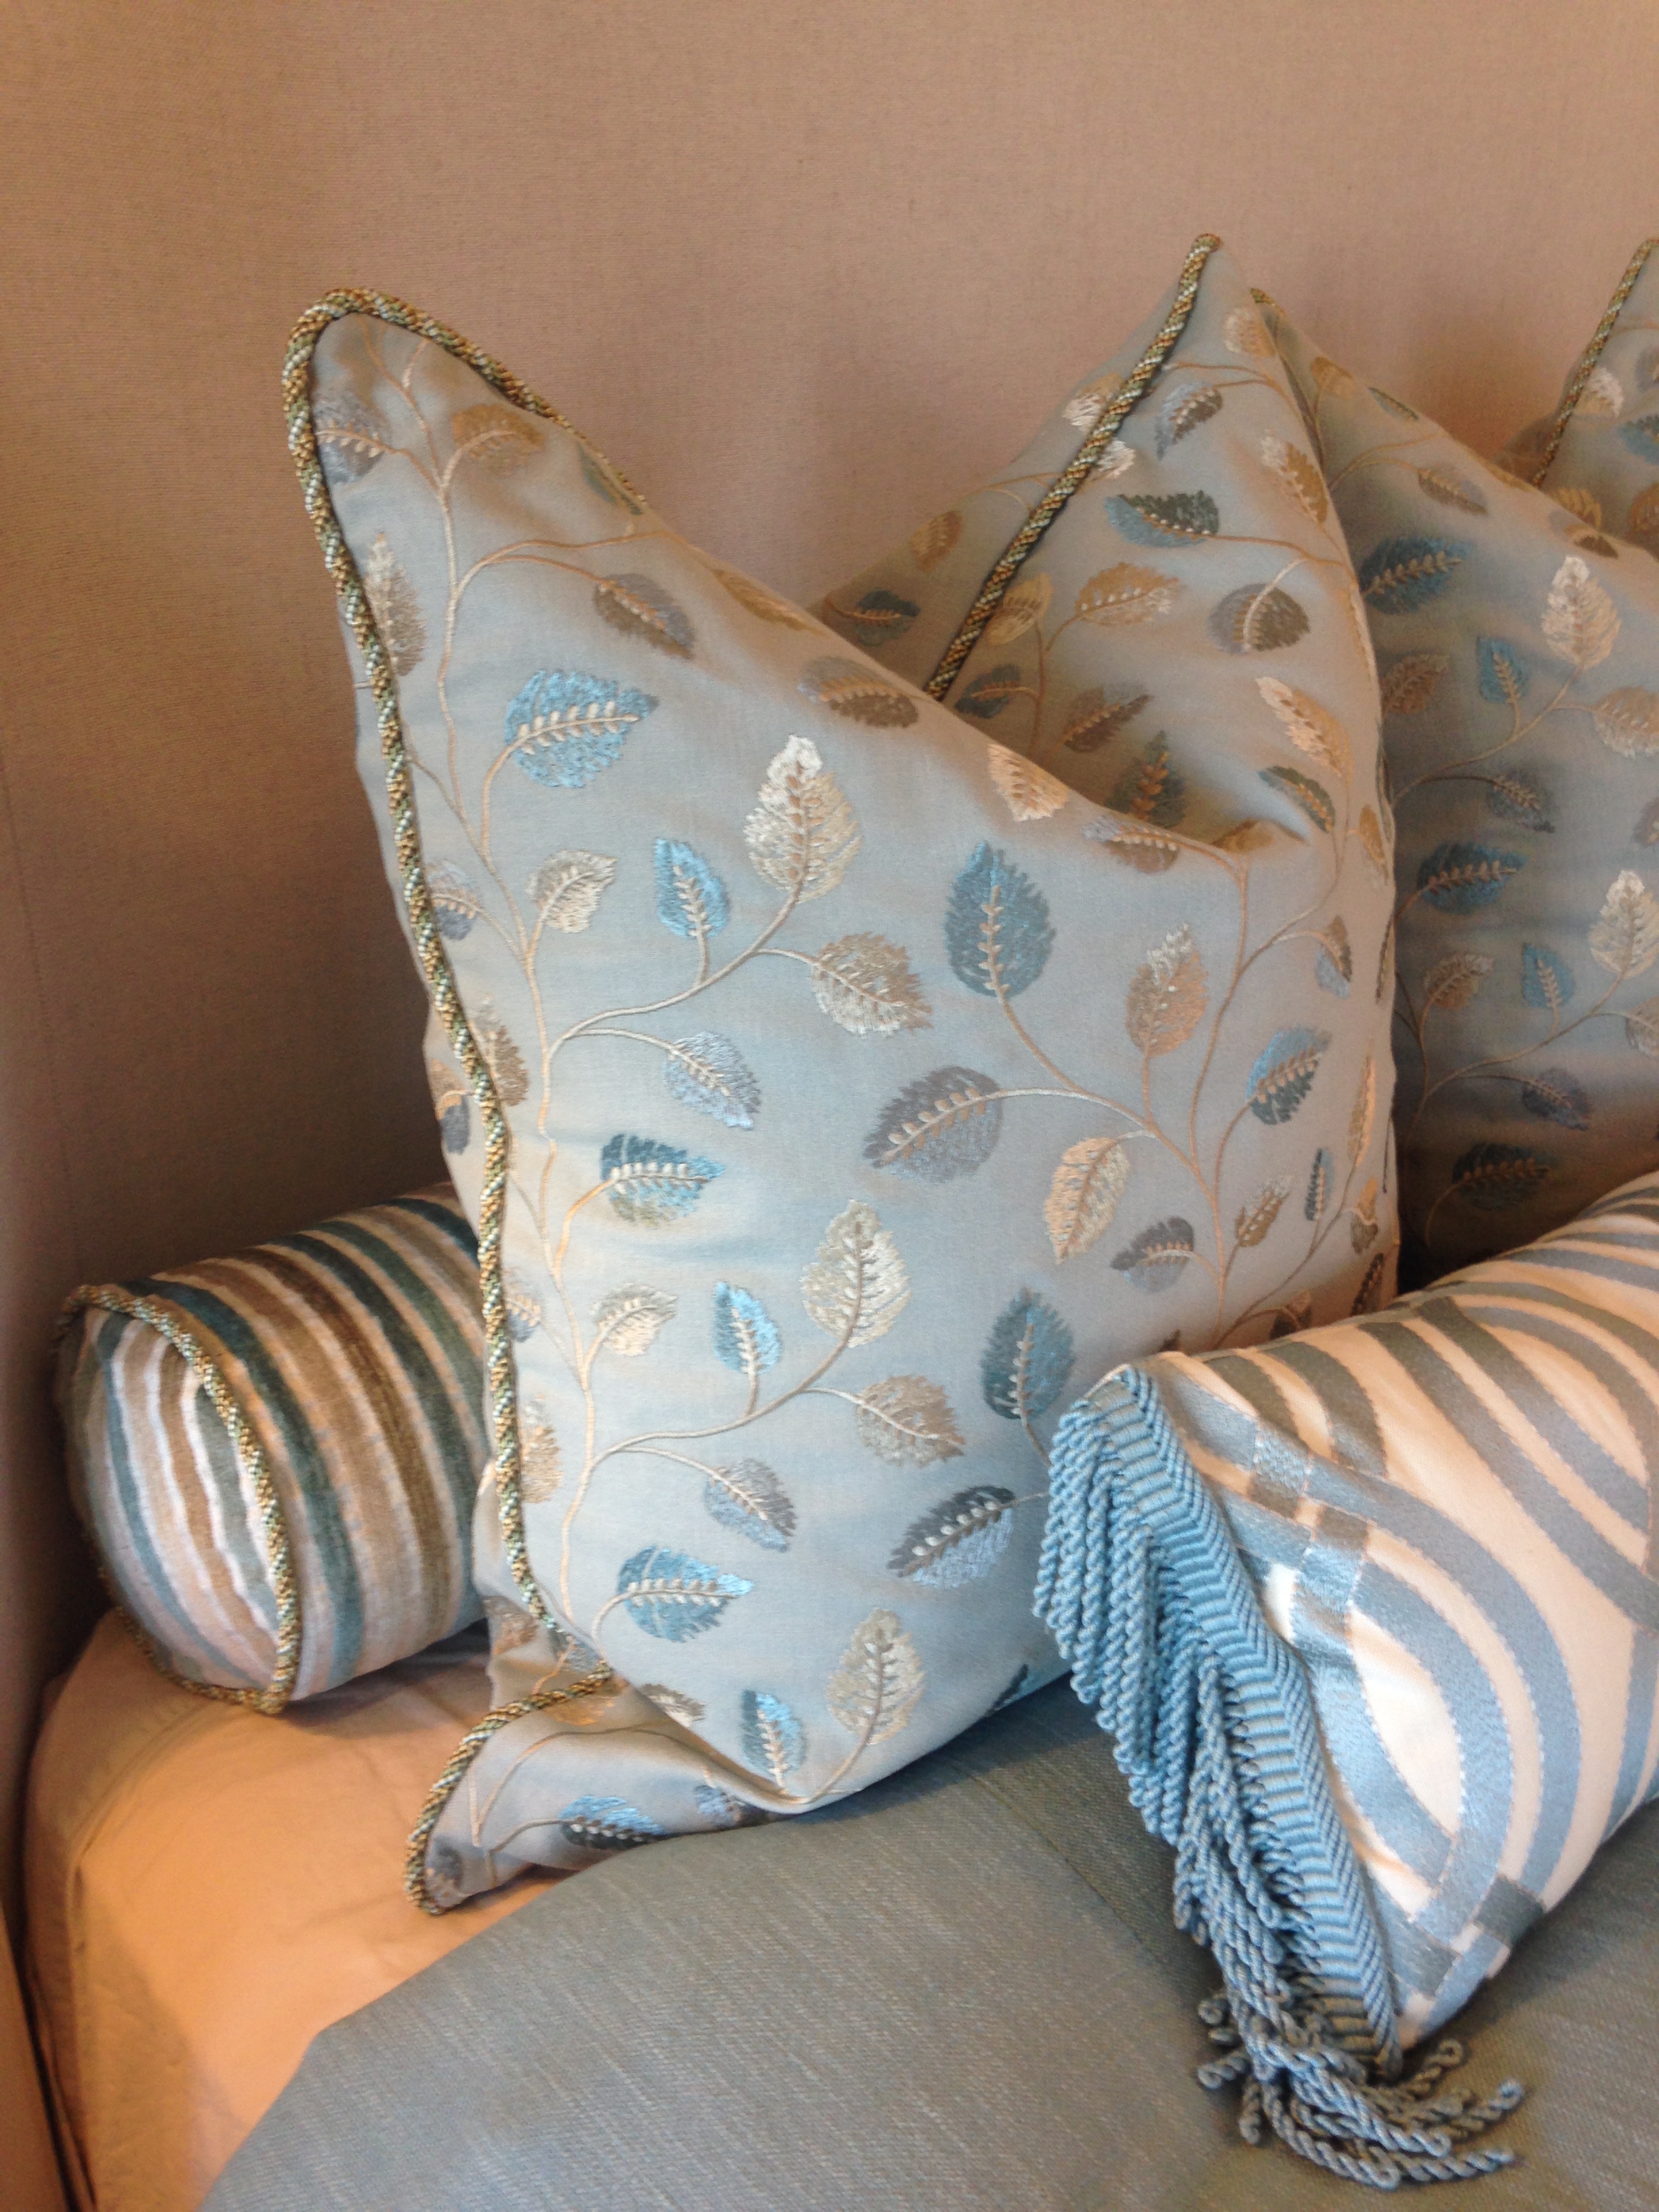 Bolster and throw pillows